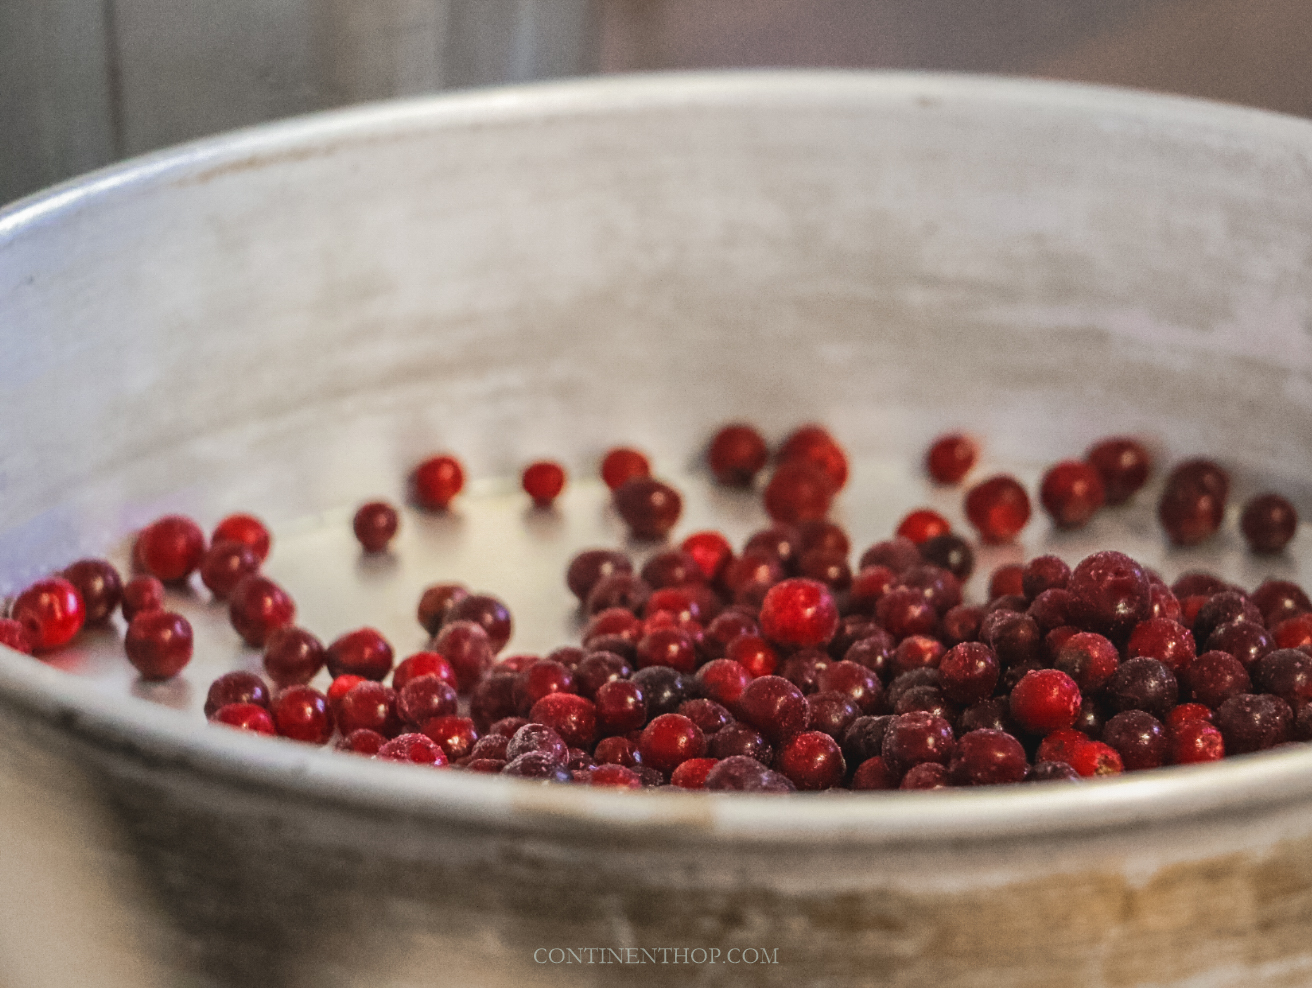 lingonberries from finland traditional and typical finnish food